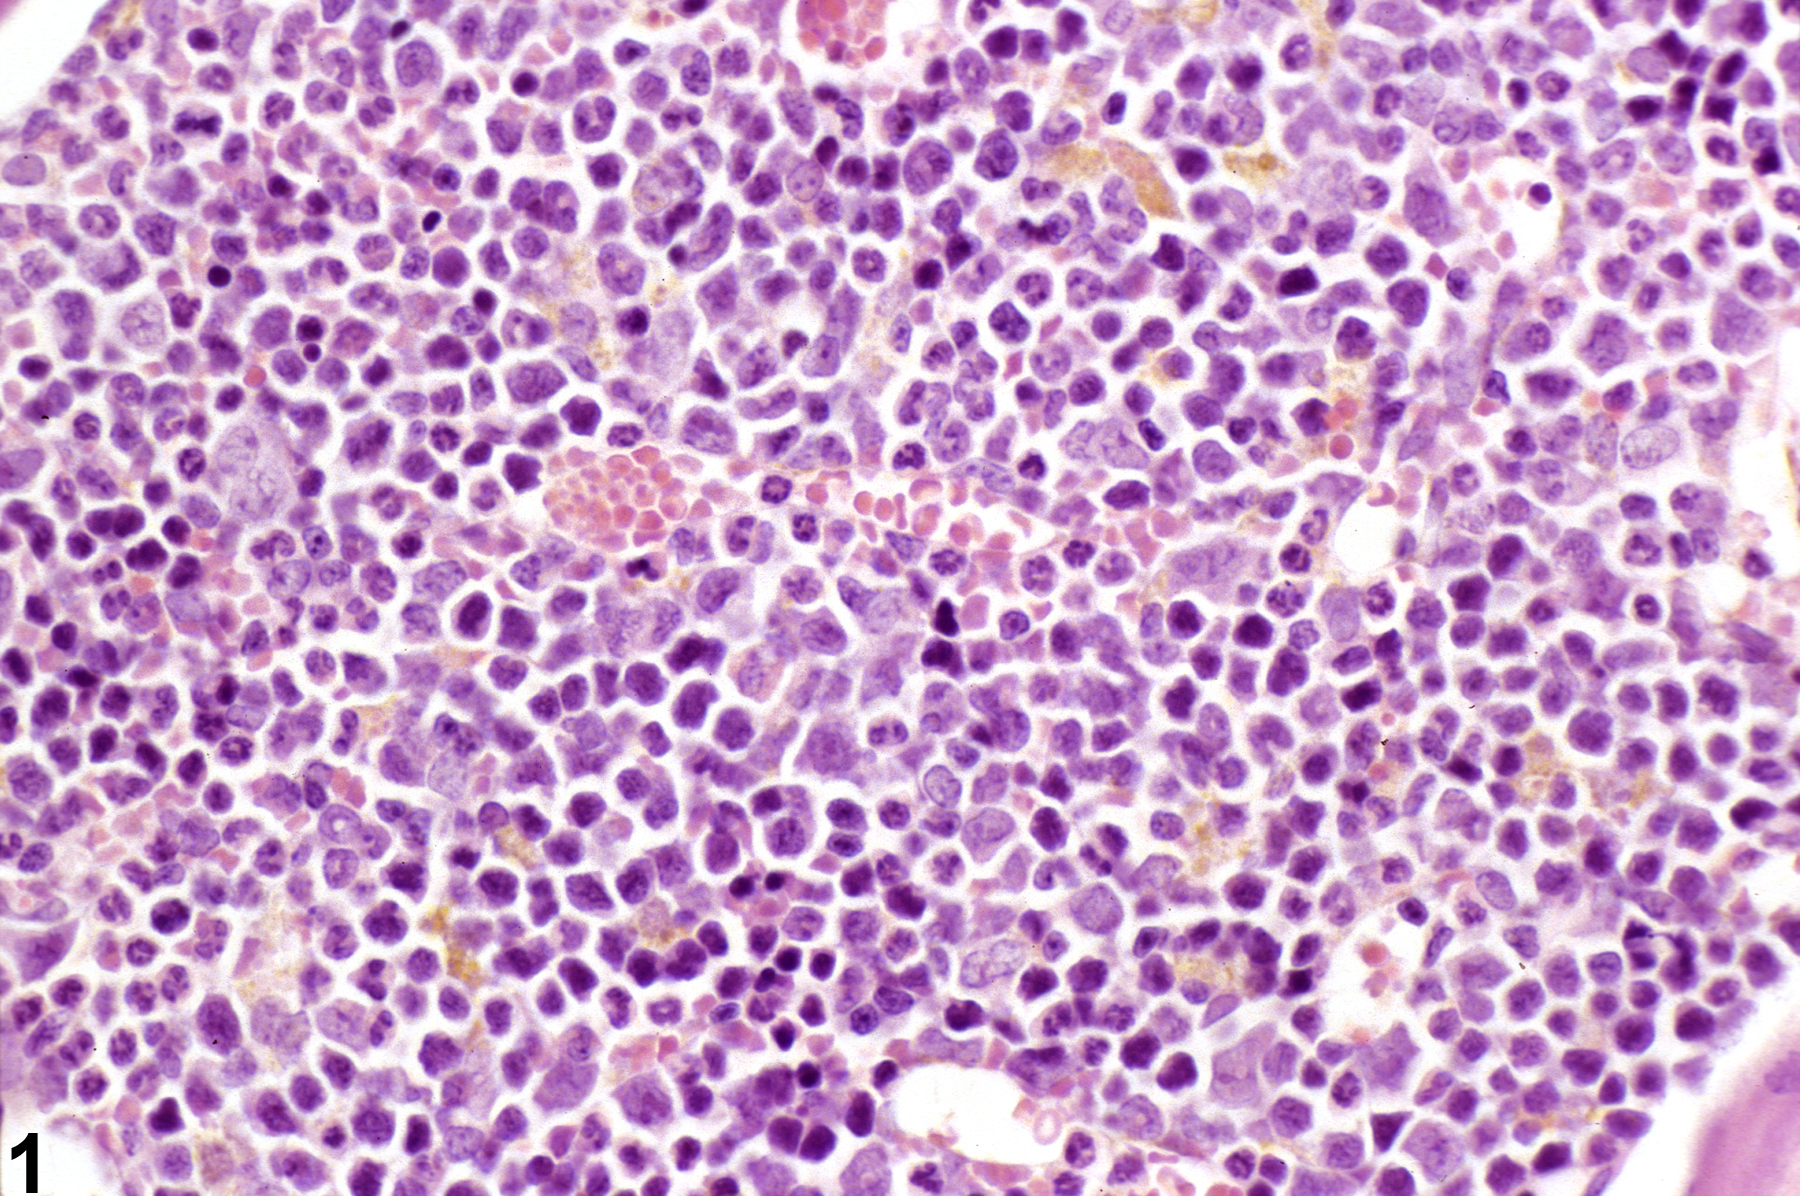 Image of pigment in the bone marrow from a male B6C3F1 mouse in a subchronic study